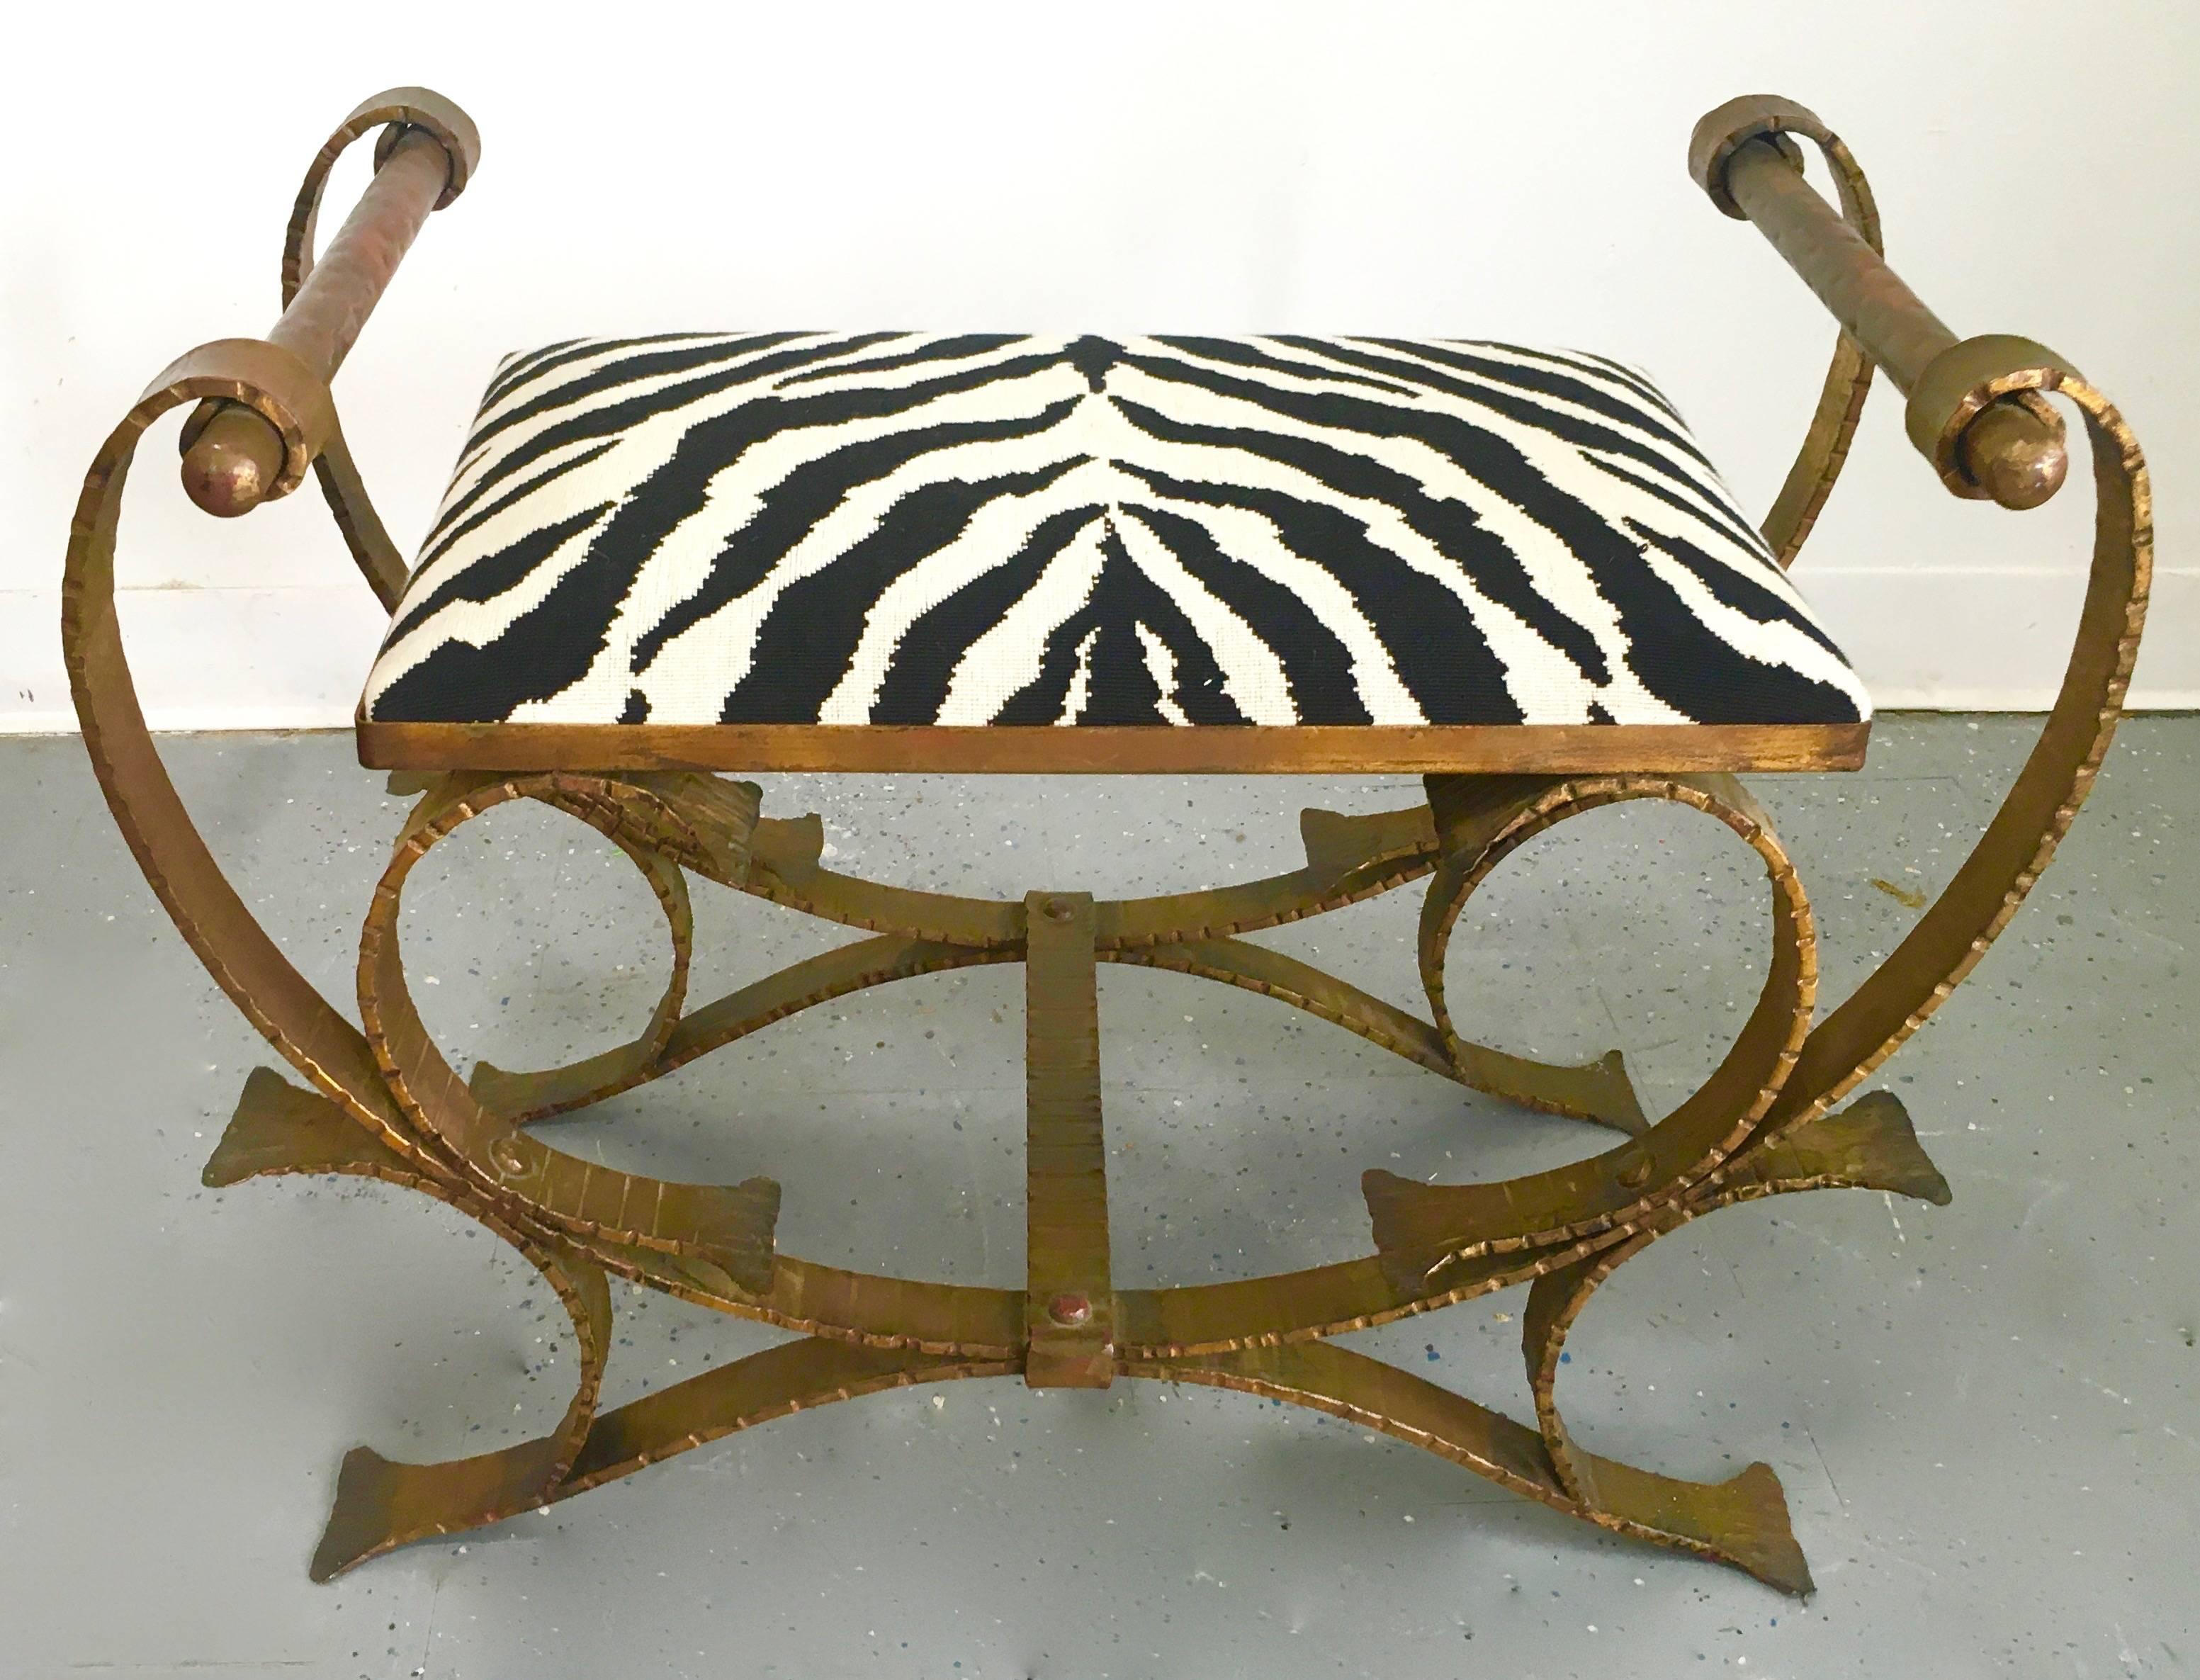 Early 20th century gilt classic wrought iron stool or bench upholstered in zebra print upholstery, the lines and attentive design definitely represent Hollywood in the early 1920s. Entire construction is hammered wrought iron, including the side